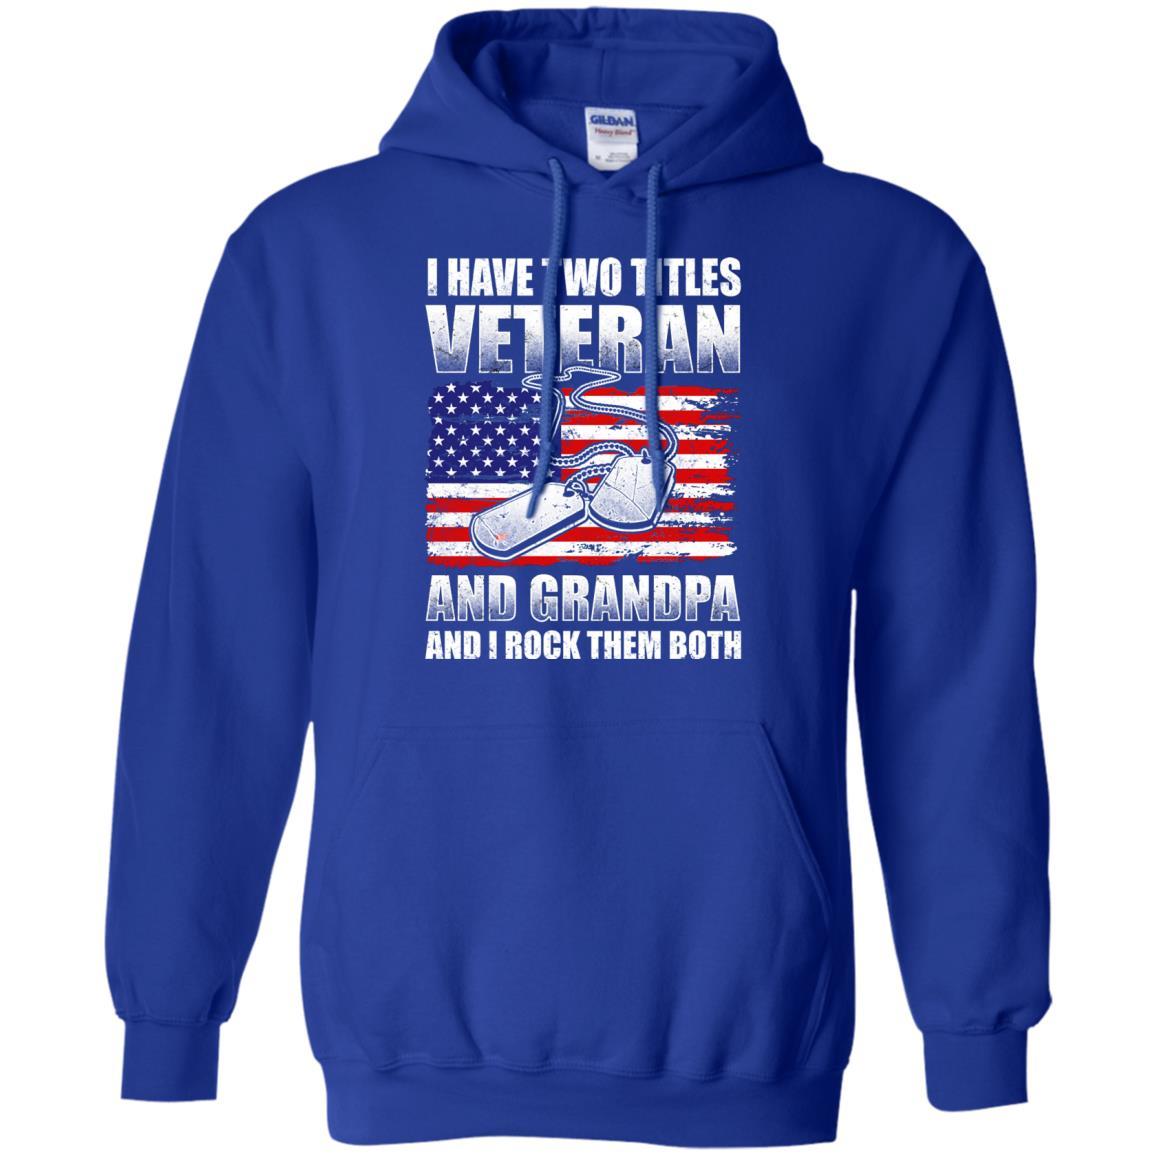 Military T-Shirt "I Have Two Titles Veteran And Grandpa And I Rock Them Both On" Front-TShirt-General-Veterans Nation